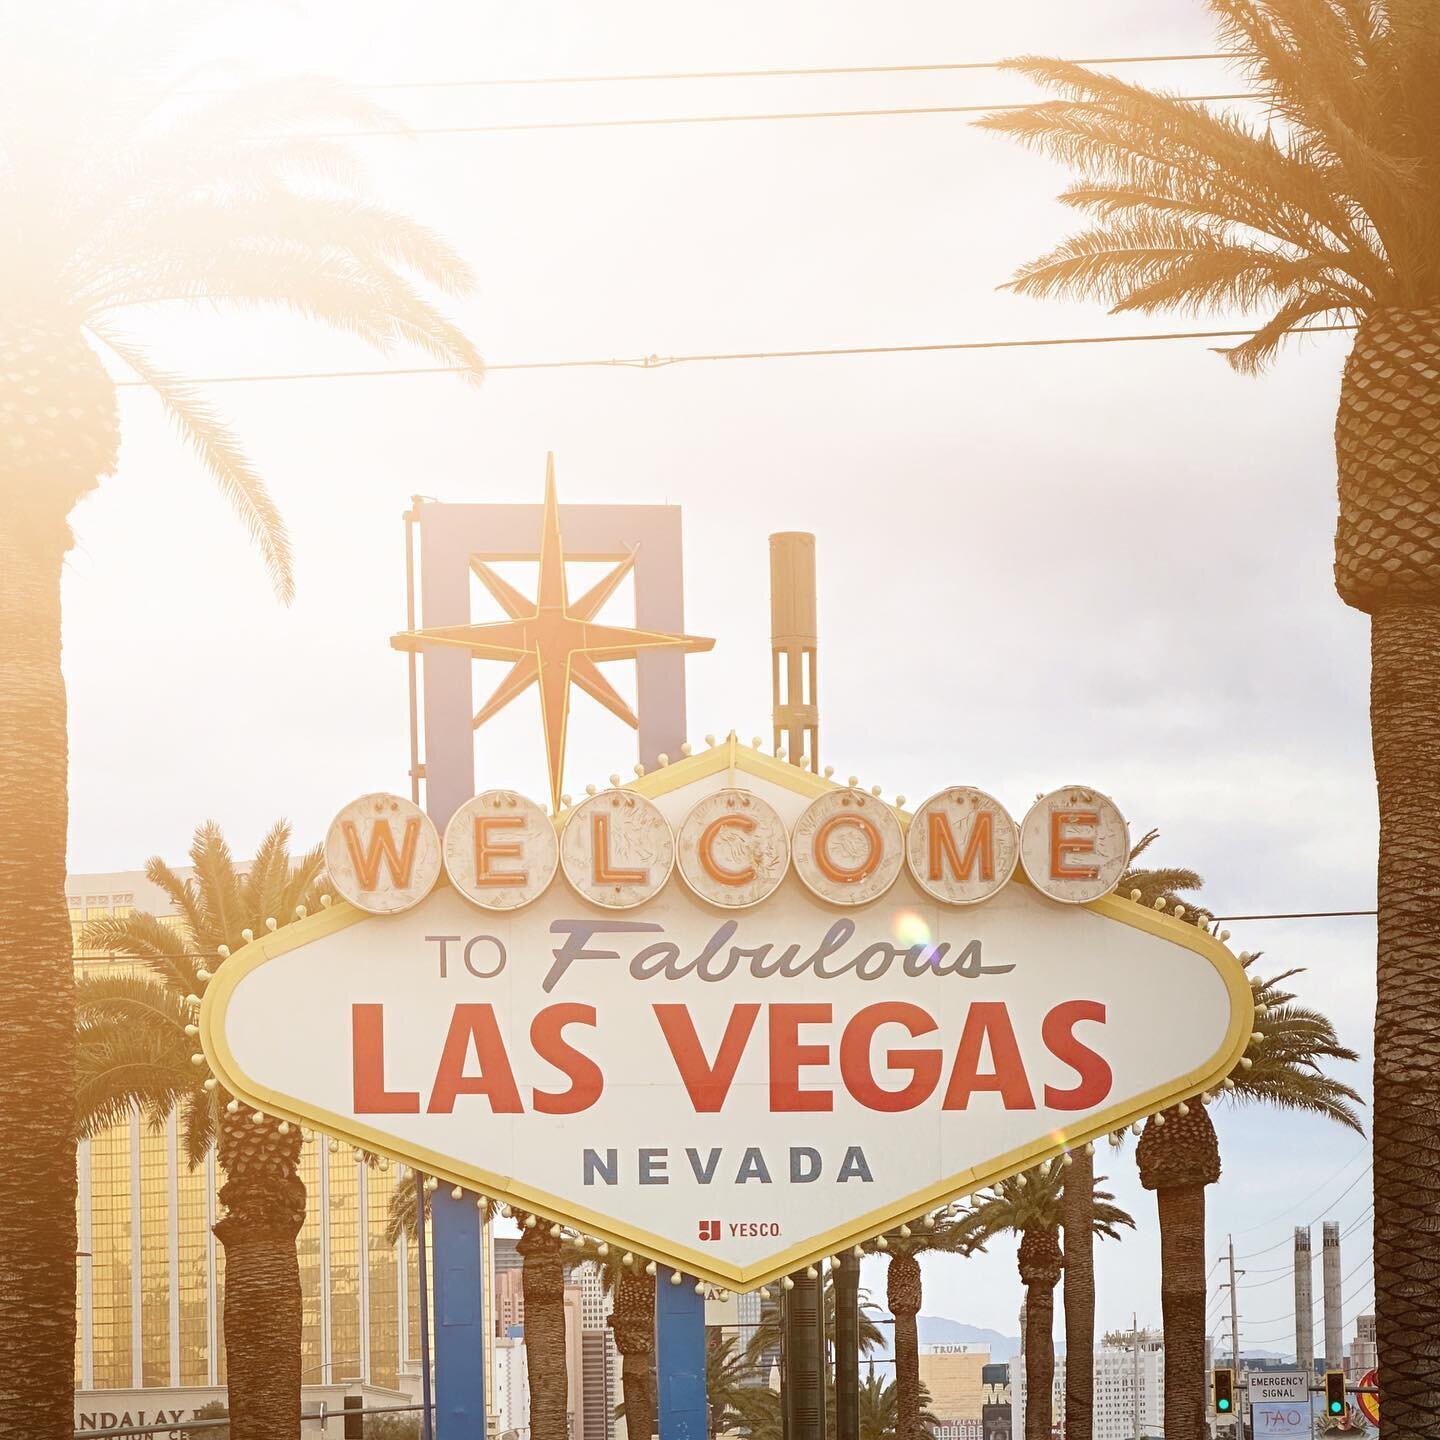 Seems fitting to kick off the 2023 ISA Show in Las Vegas with a visit to one of the most iconic signs ever built. She&rsquo;s a beaut&rsquo;! 

𝗠 ⚡️🪧⚡️𝗪⁠

#ISASignExpo2023 #signs #signage #neonsigns #signssignseverywheresigns #signexpo #wonderfull